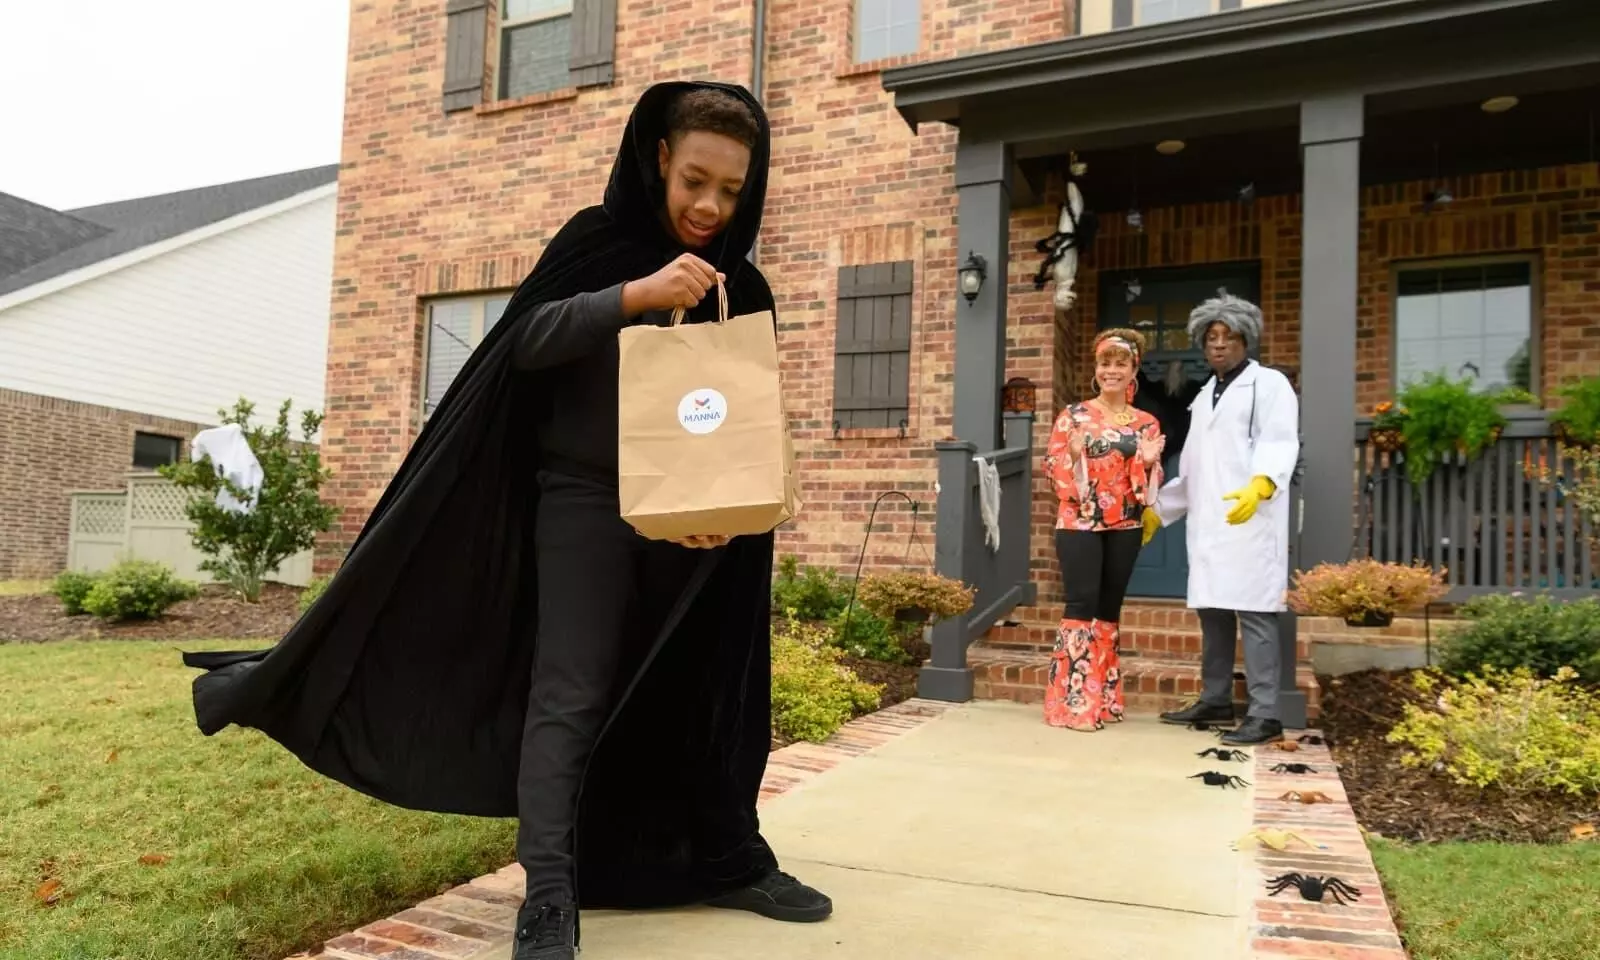 Trick or treat takes to the skies with Manna Drone Delivery